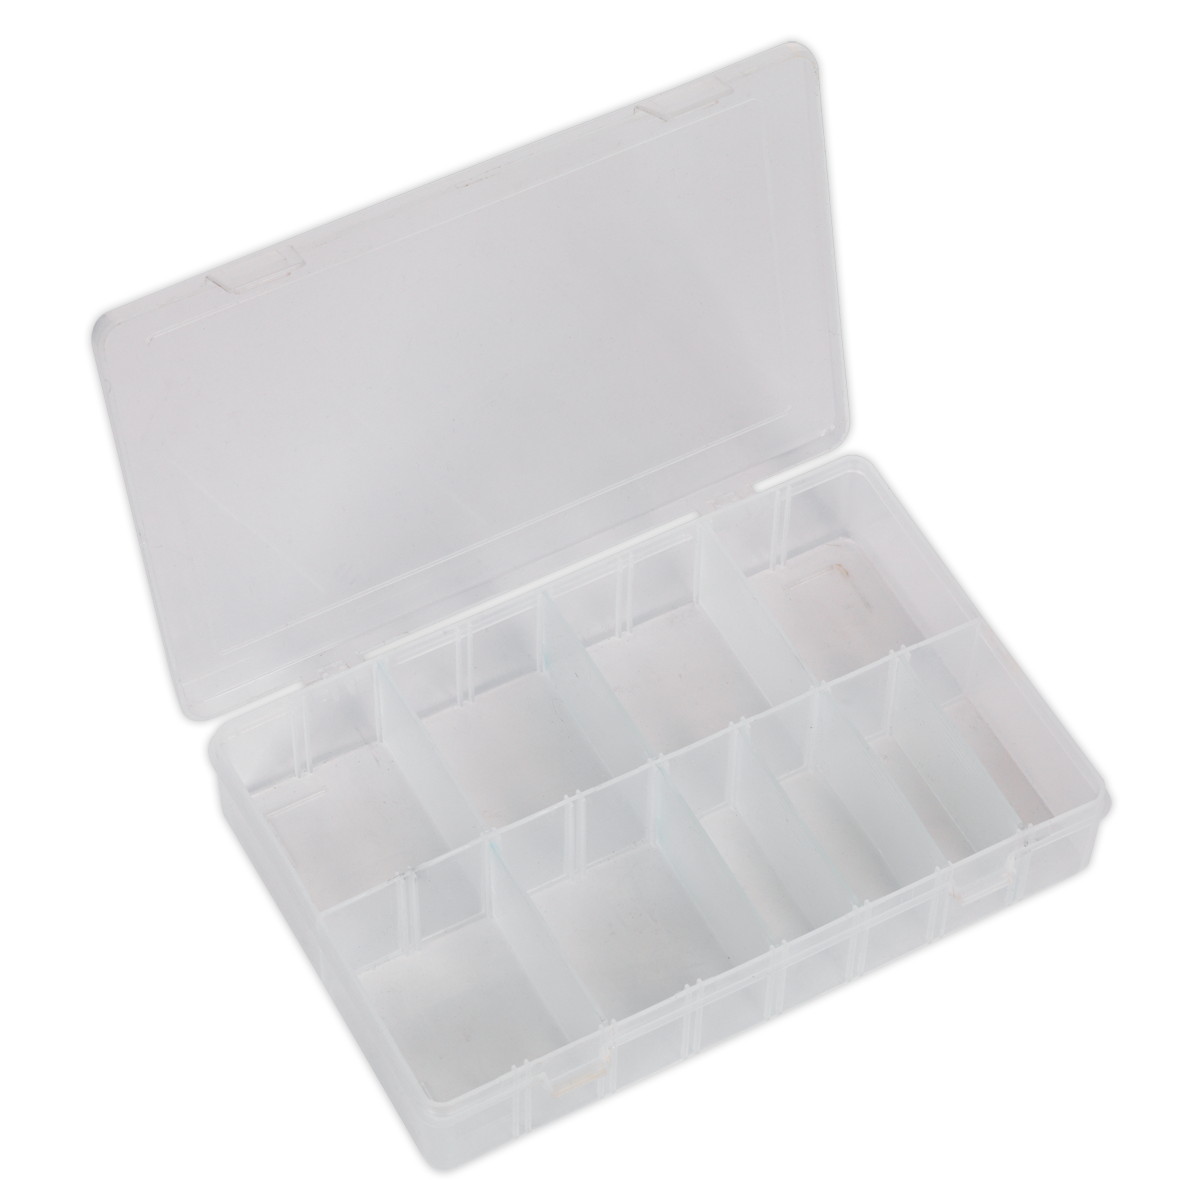 Assortment Box with 8 Removable Dividers - ABBOXMED - Farming Parts